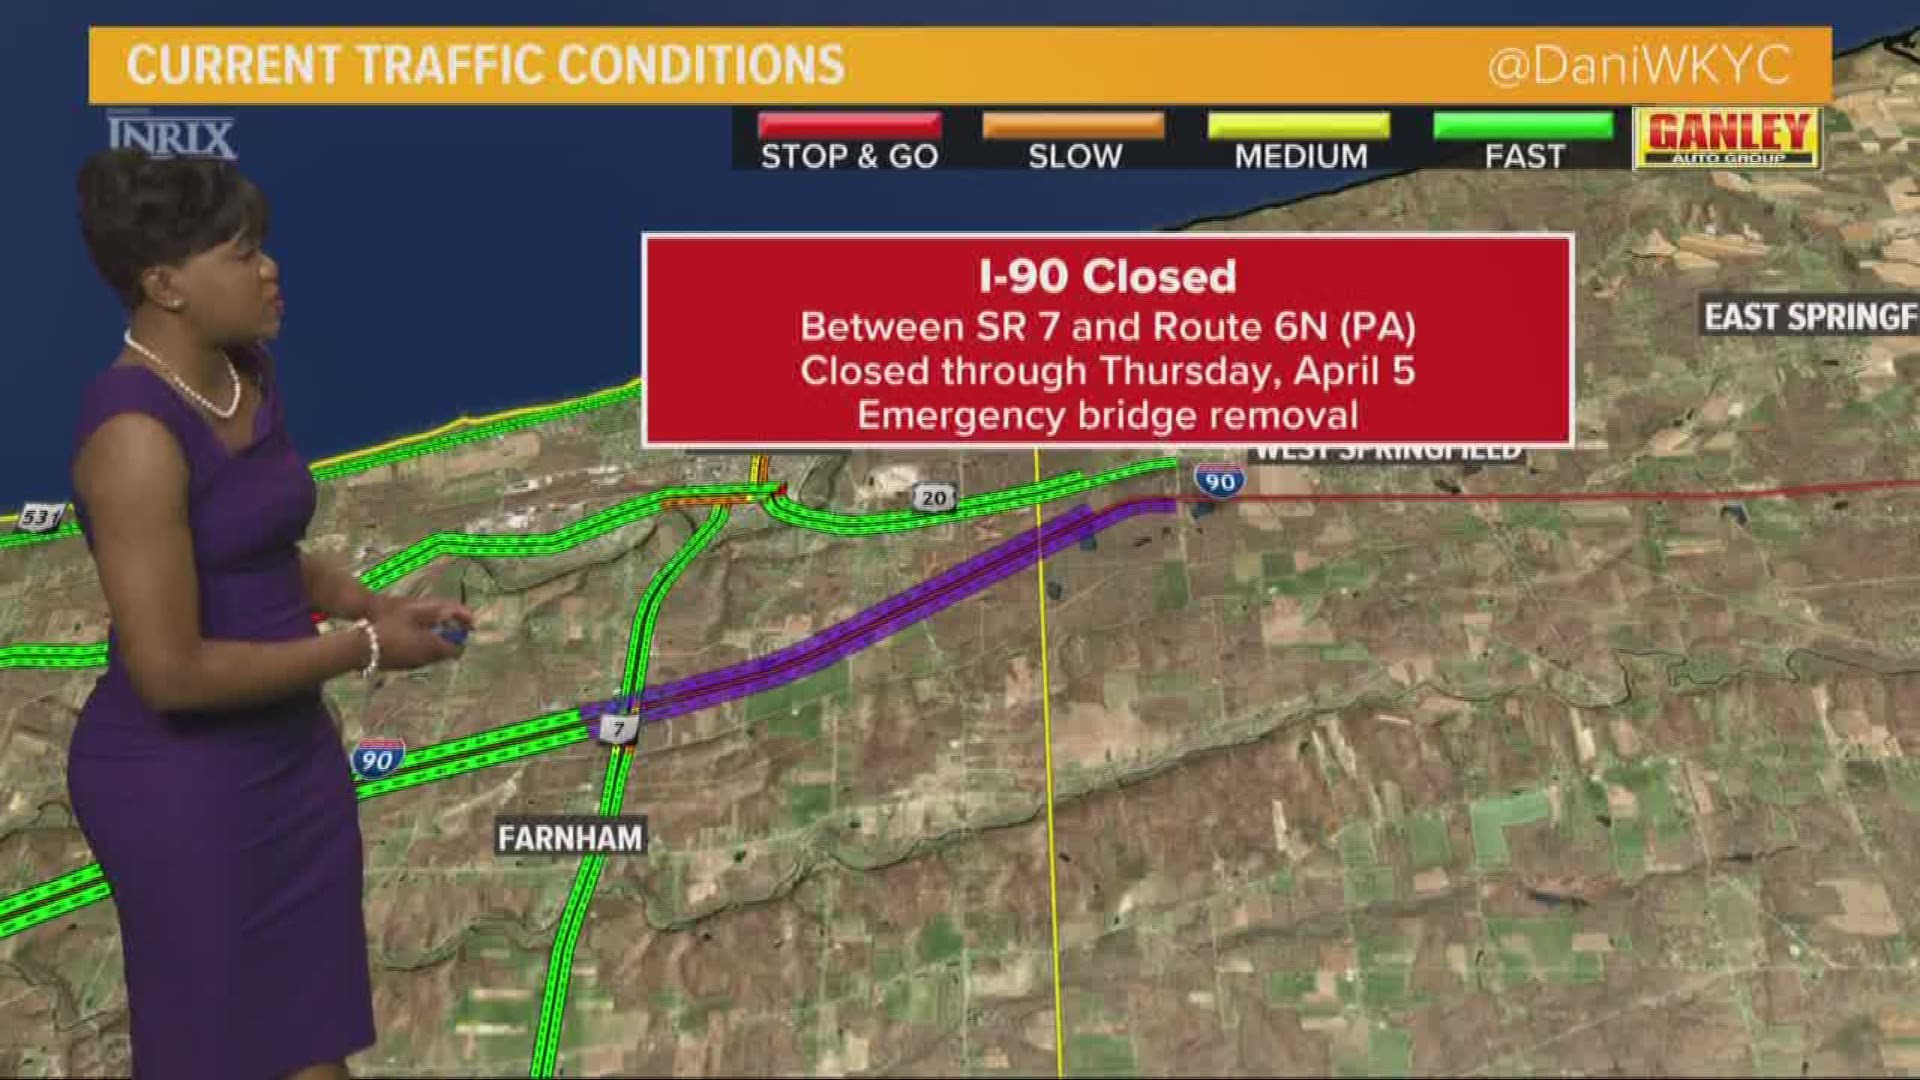 April 3, 2018: Drivers can expect a detour for the next few days as I-90 is closed in both directions between Route 7 in Ohio and Route 6 in Pennsylvania.